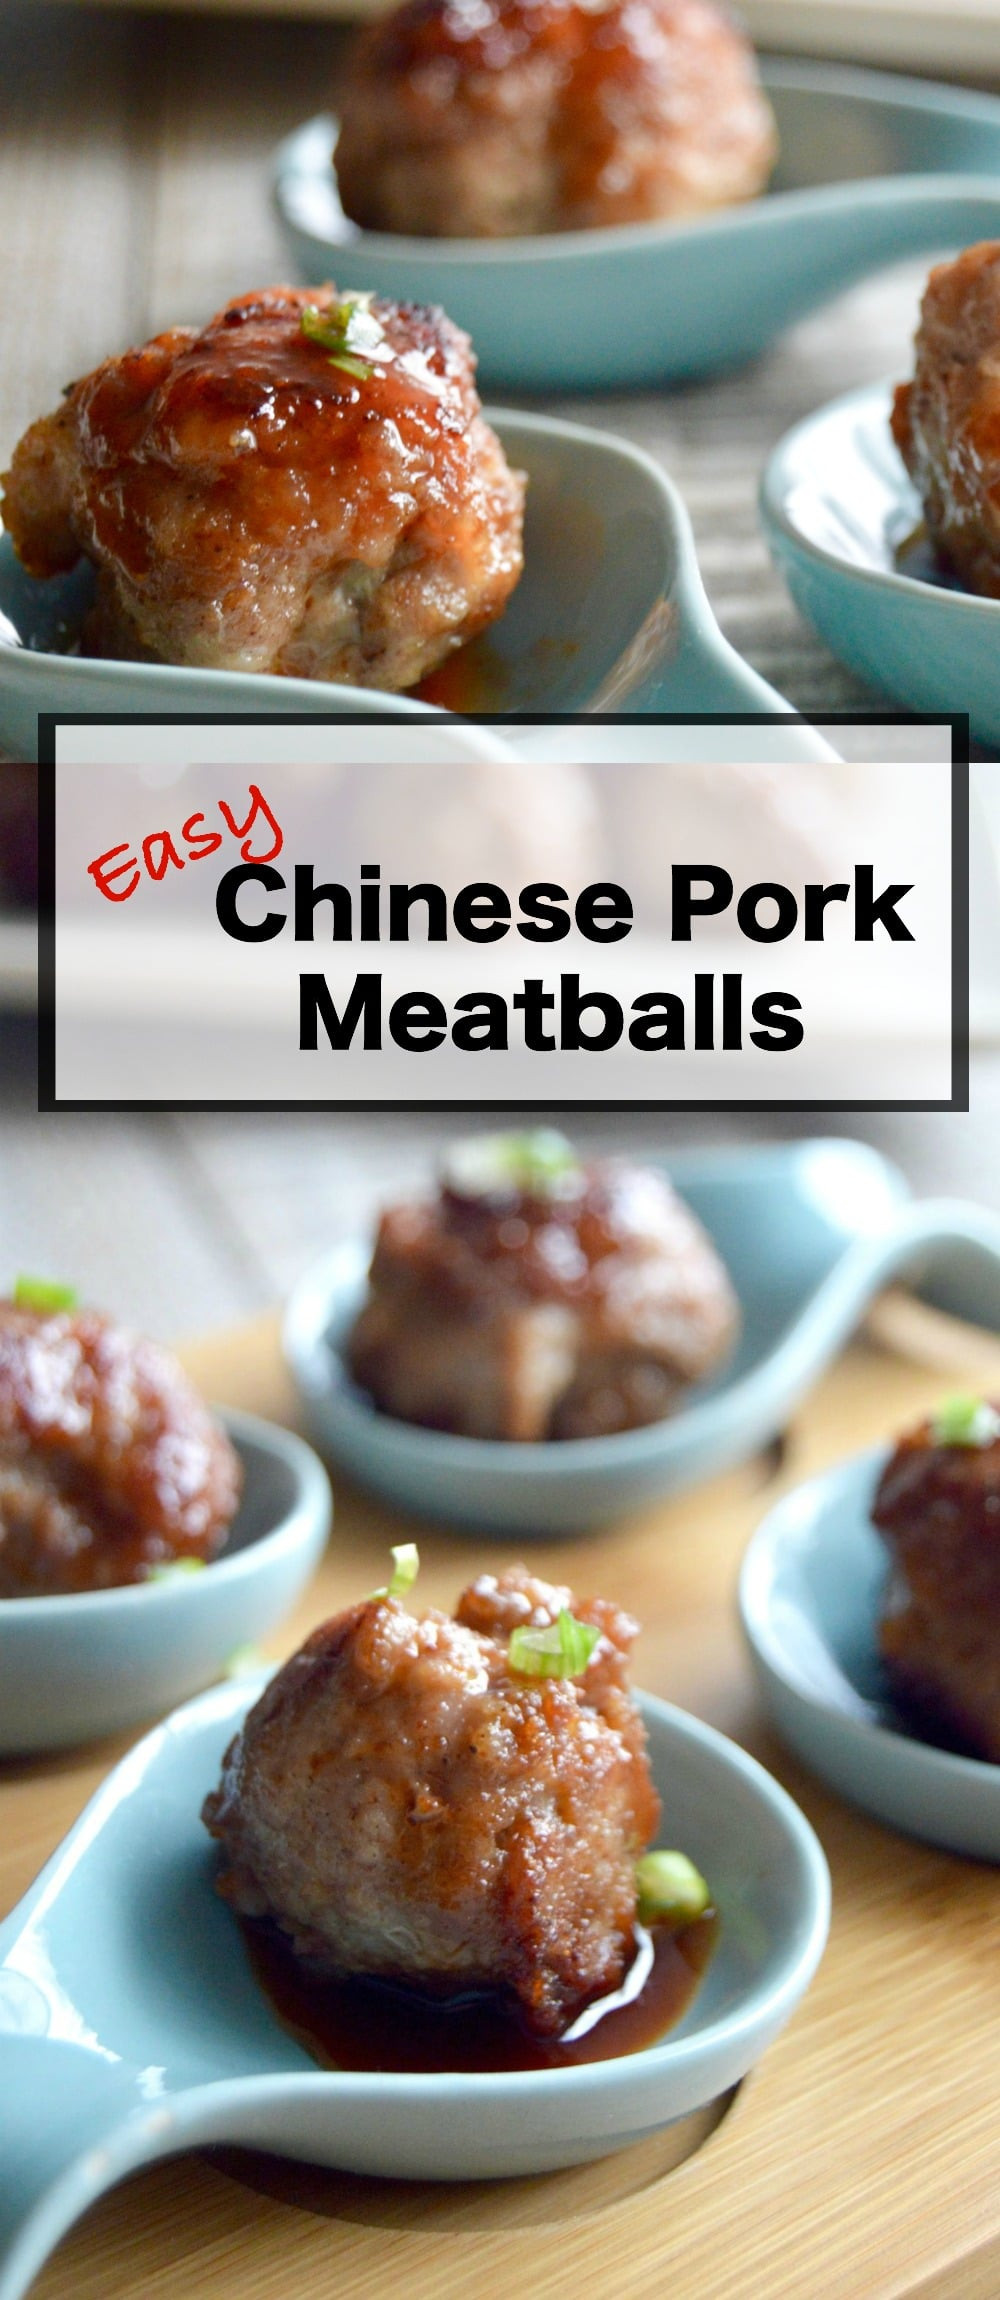 Chinese Meatballs Recipes
 Asian Meatballs Chinese Pork Meatballs Char Siew style